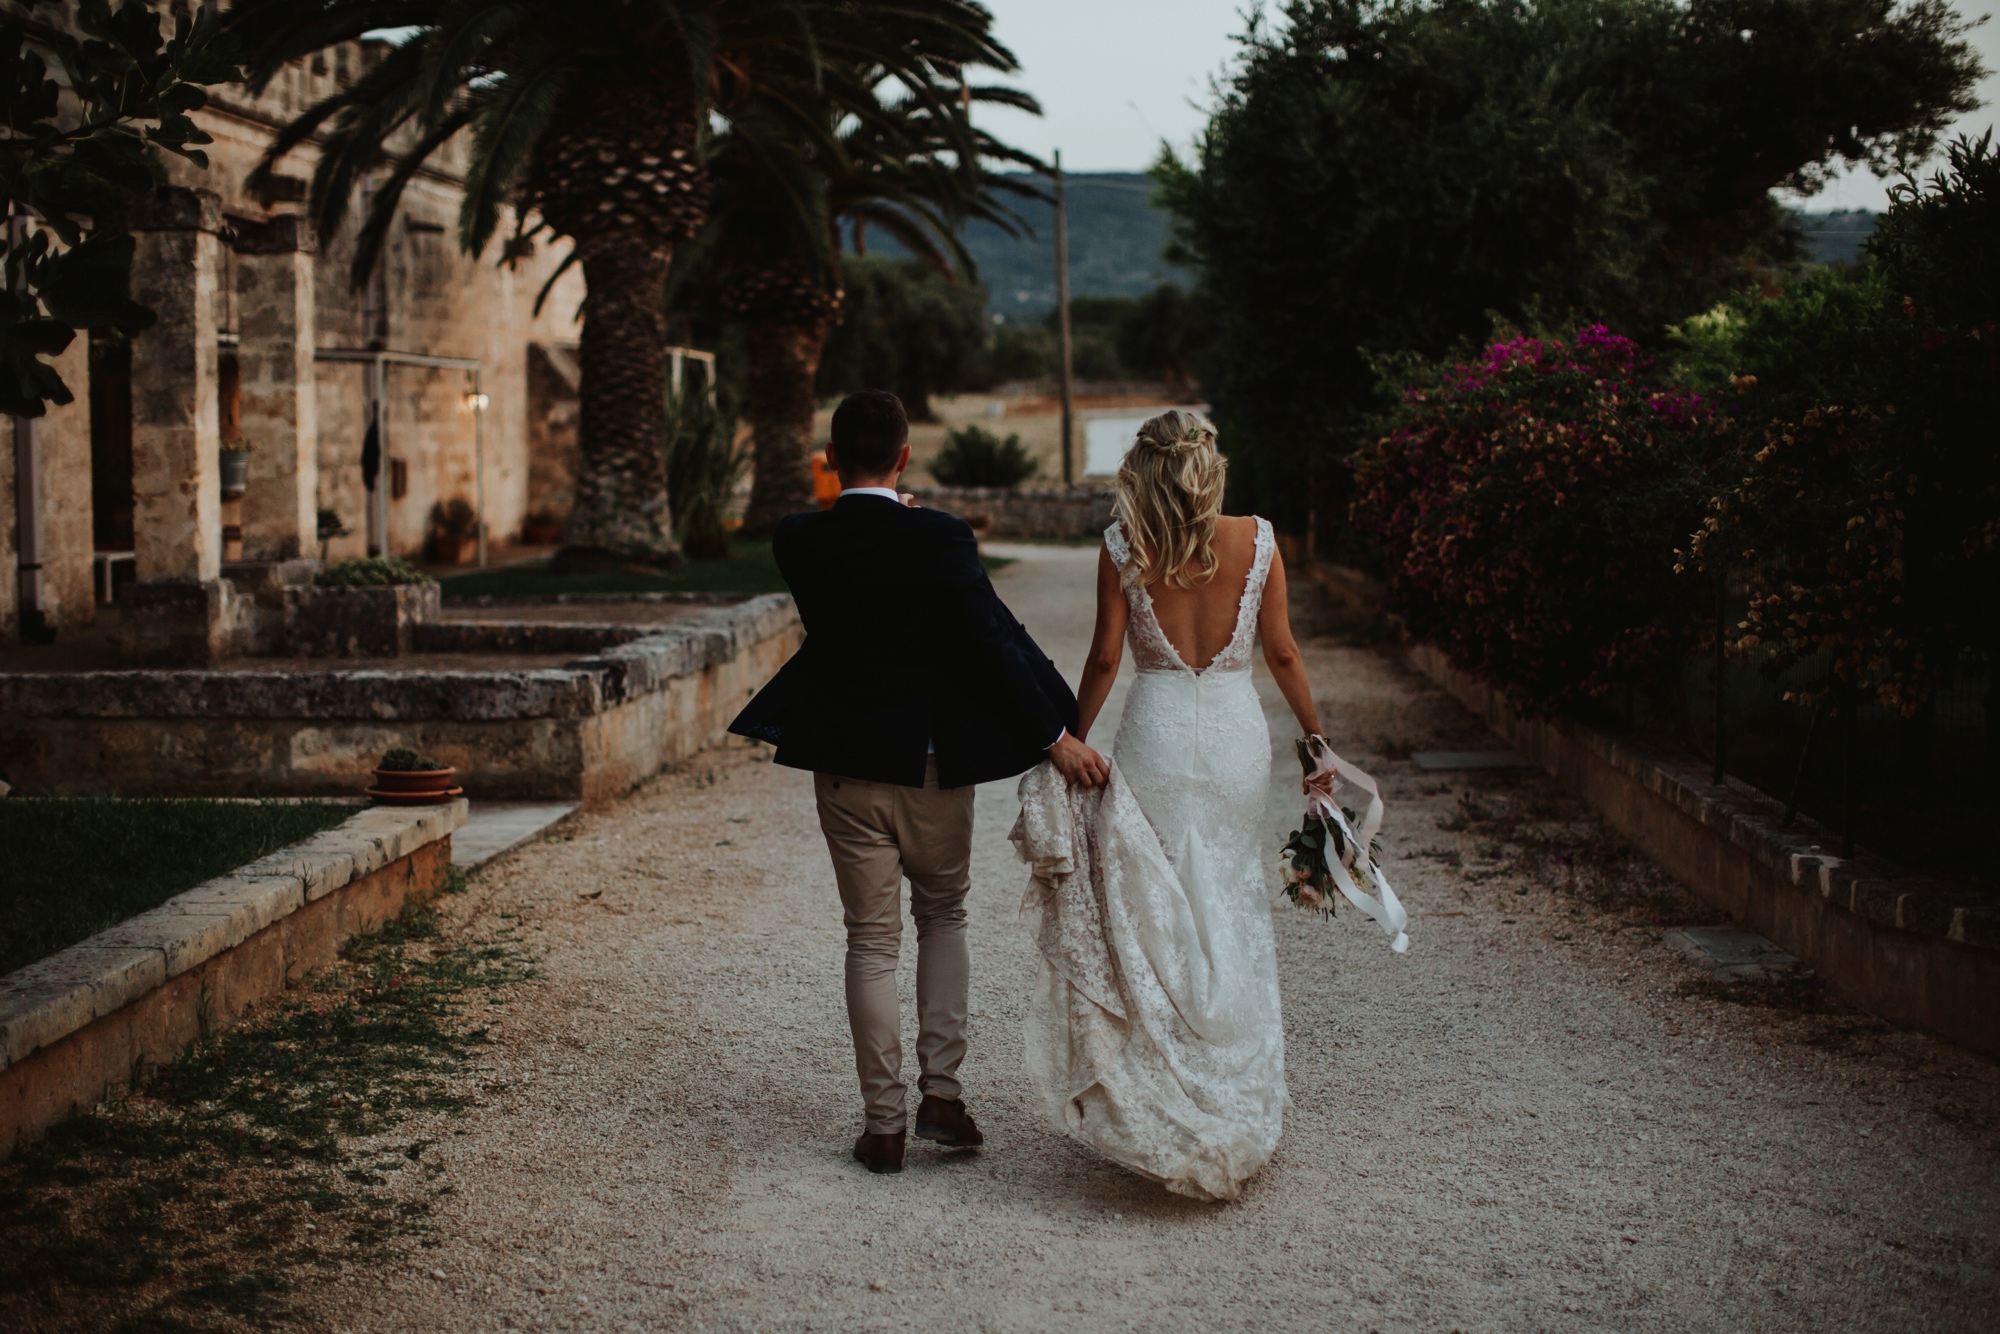 0000000063_Rob and Lucy-711_Weddings_Destination_Italy_got_Just_Engaged.jpg